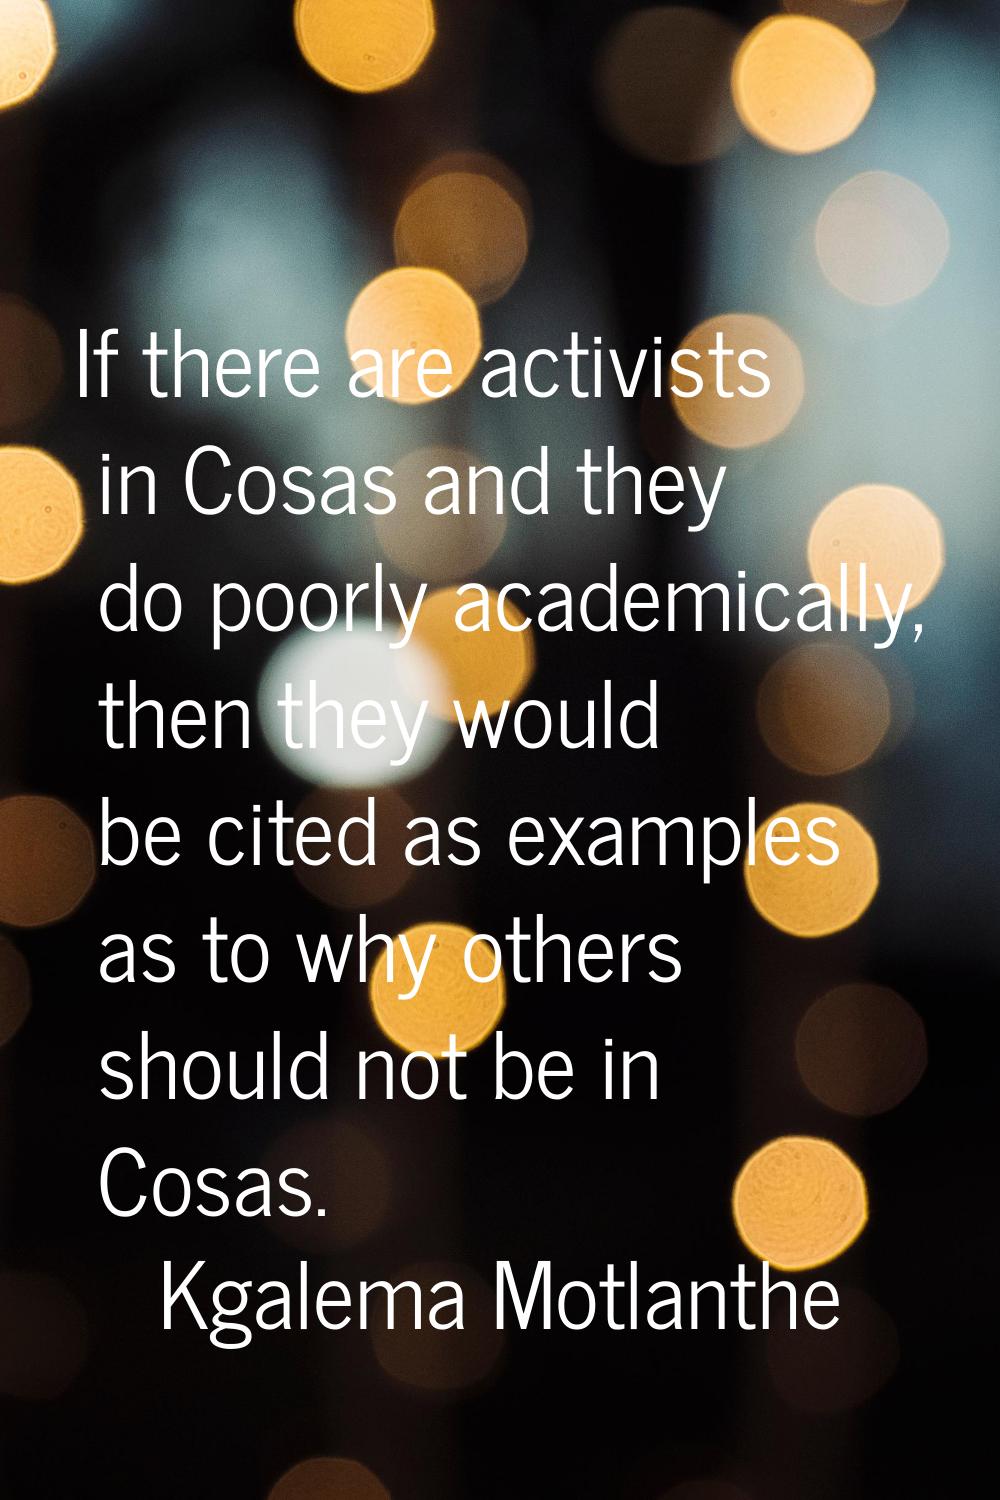 If there are activists in Cosas and they do poorly academically, then they would be cited as exampl